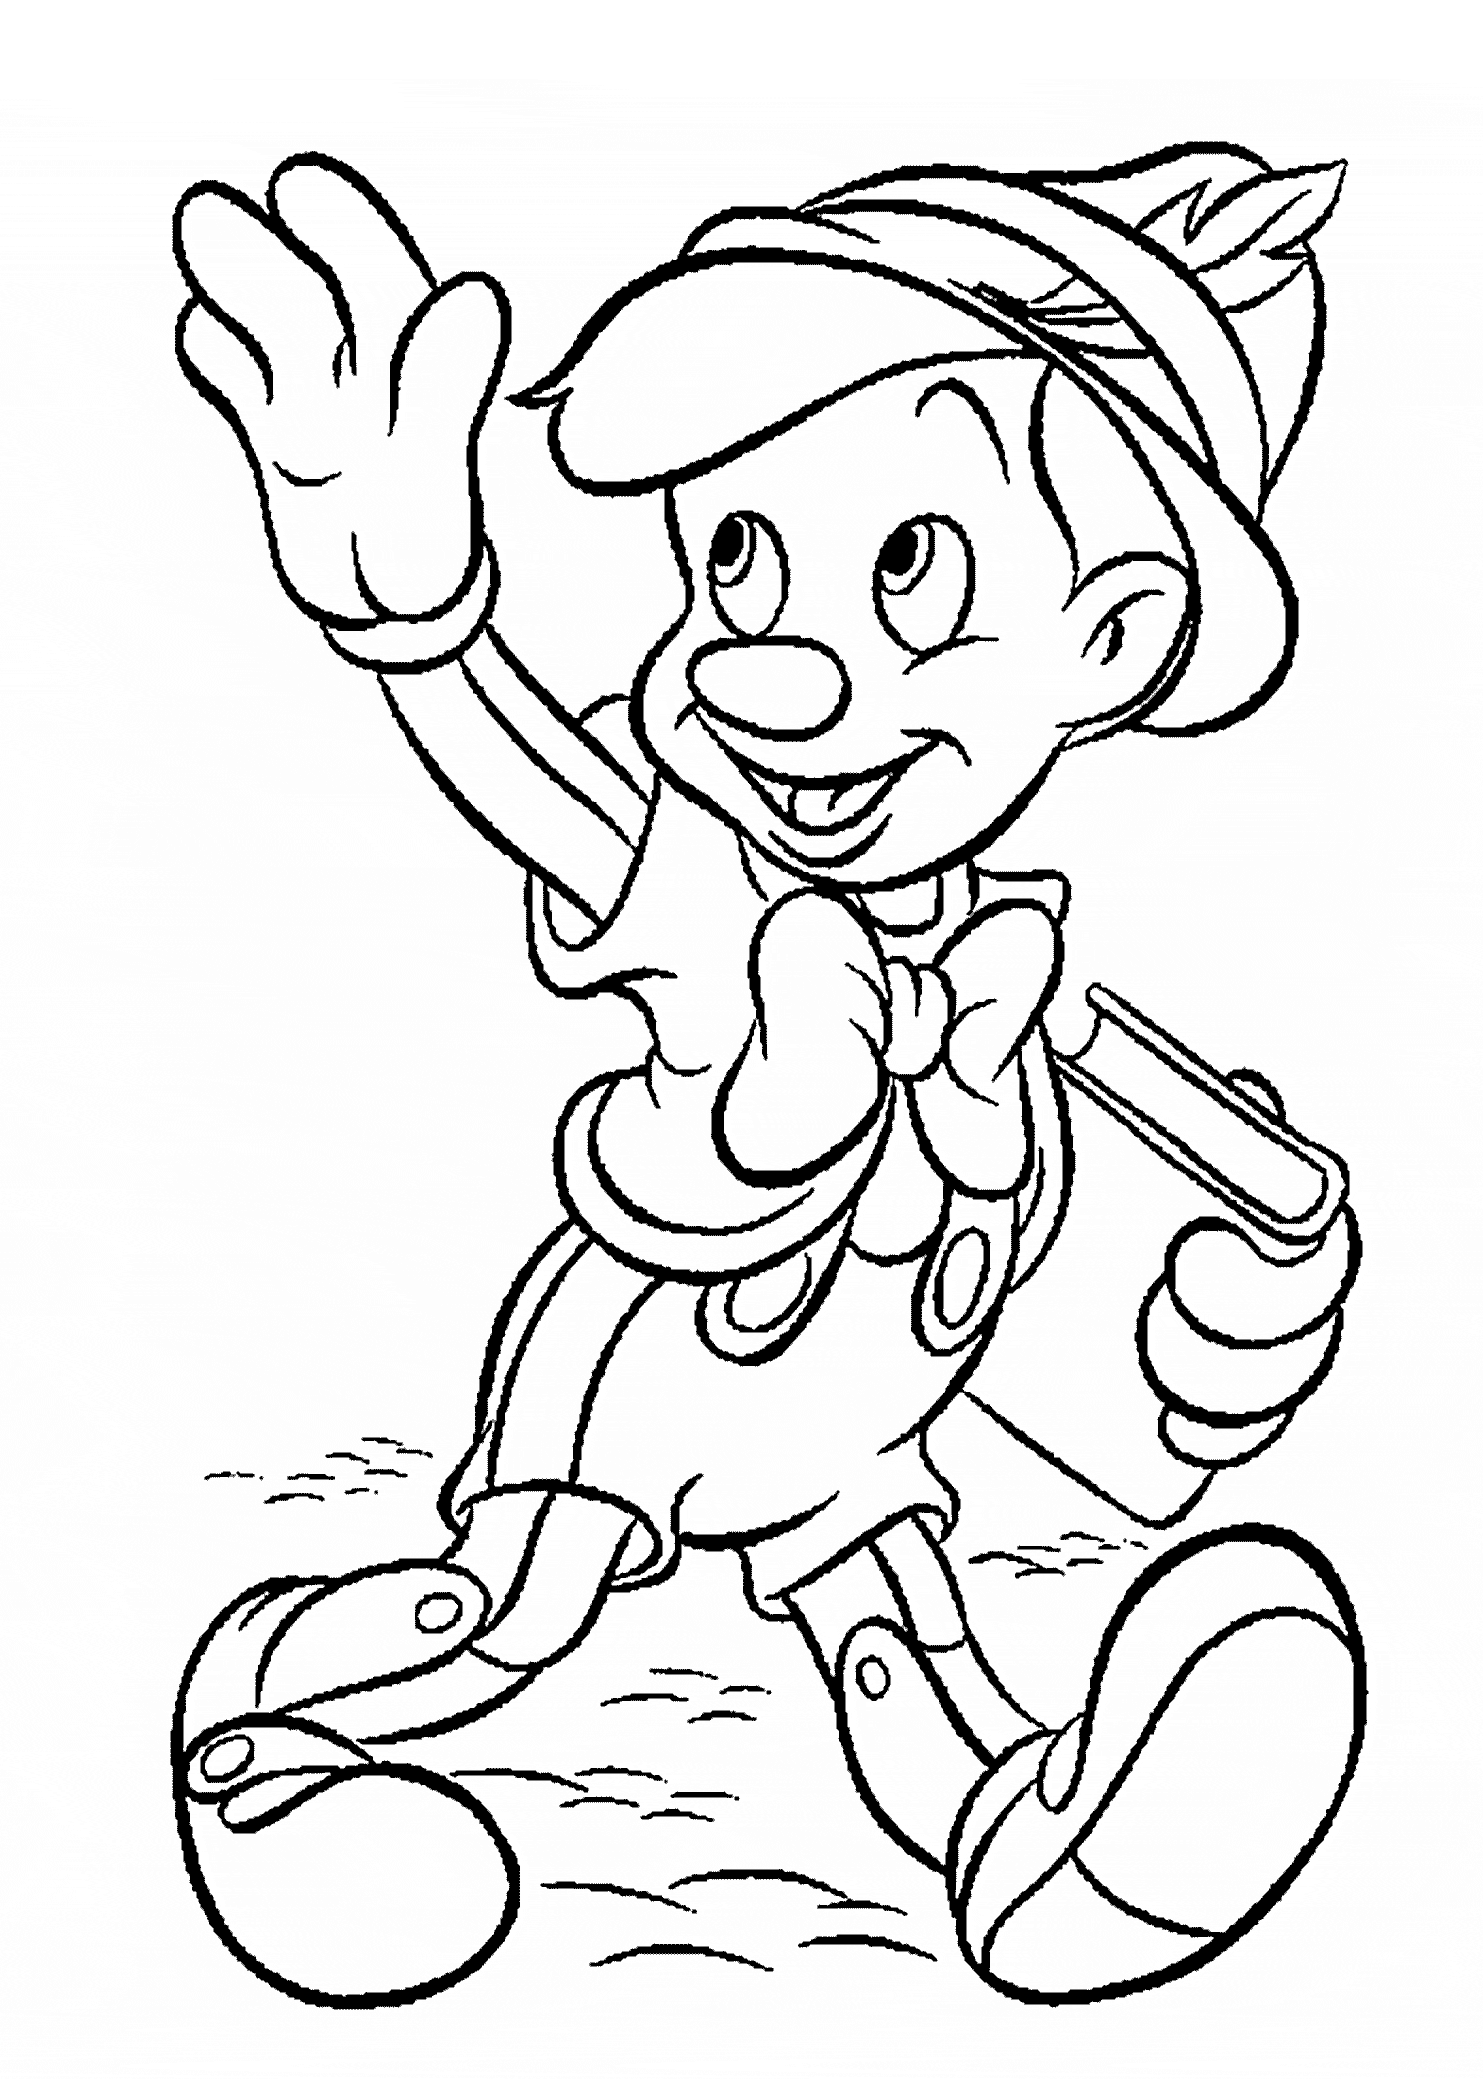 disney character coloring pages may 2010 gtgt disney coloring pages disney character coloring pages 